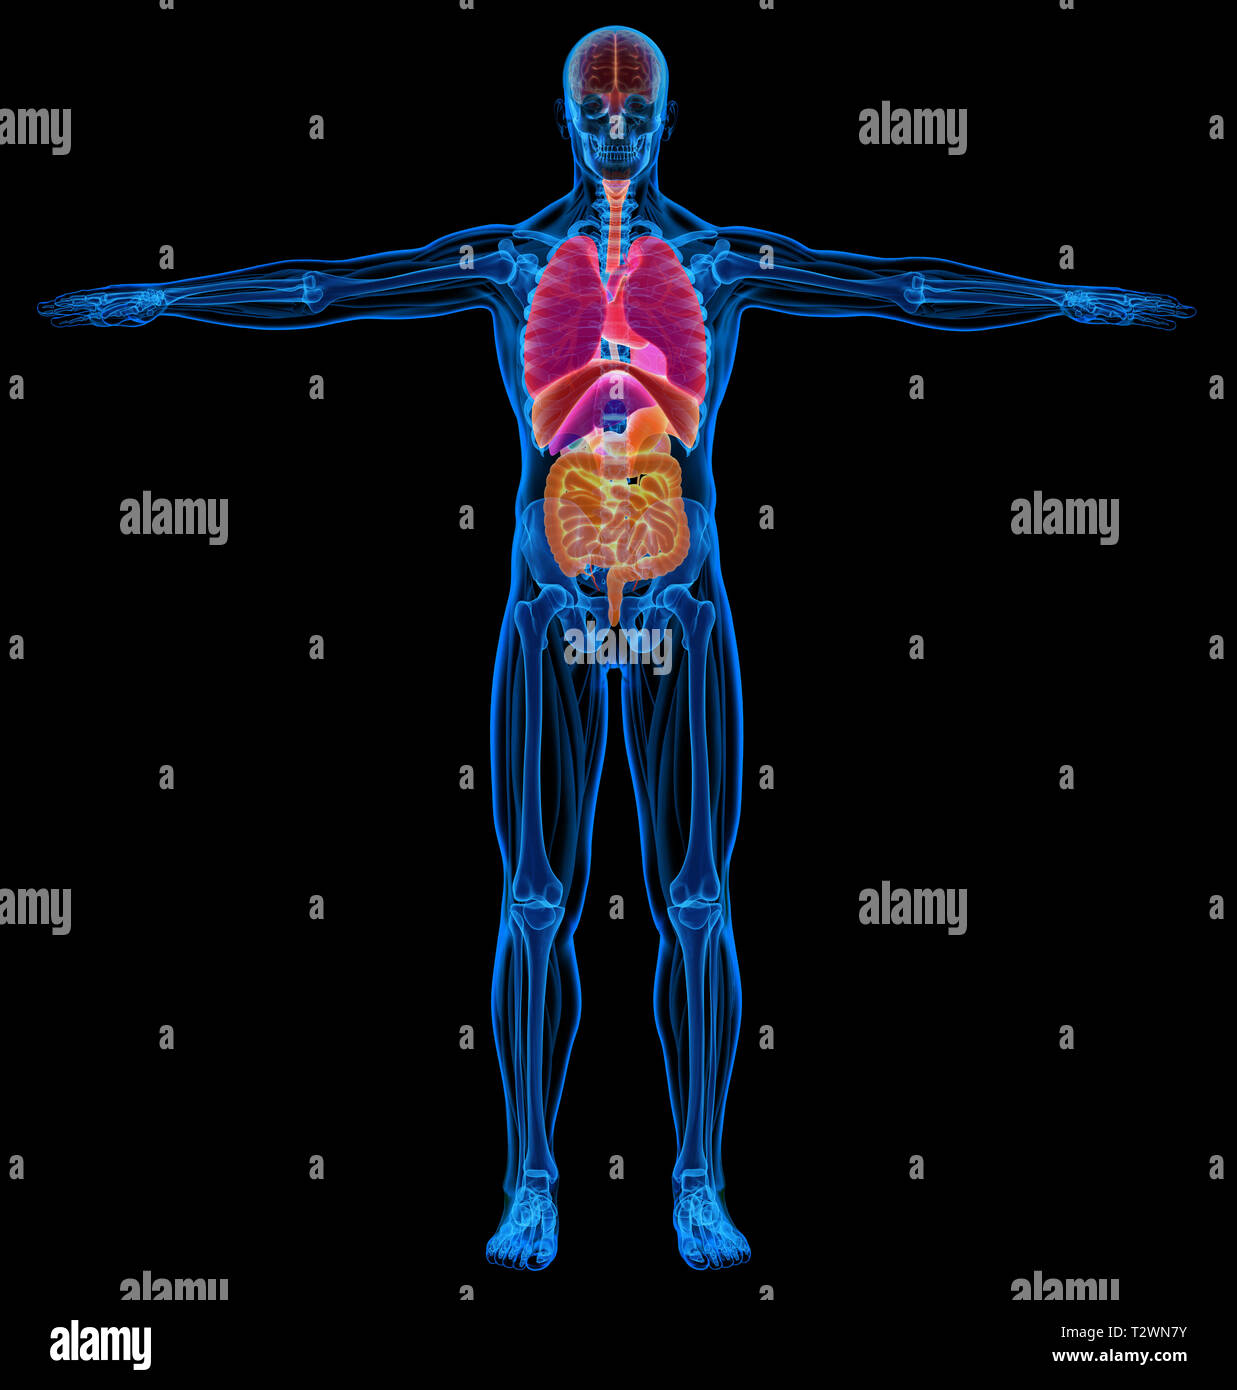 Man skeletal, muscles and internal organs diagram. X-ray. On black background. Stock Photo